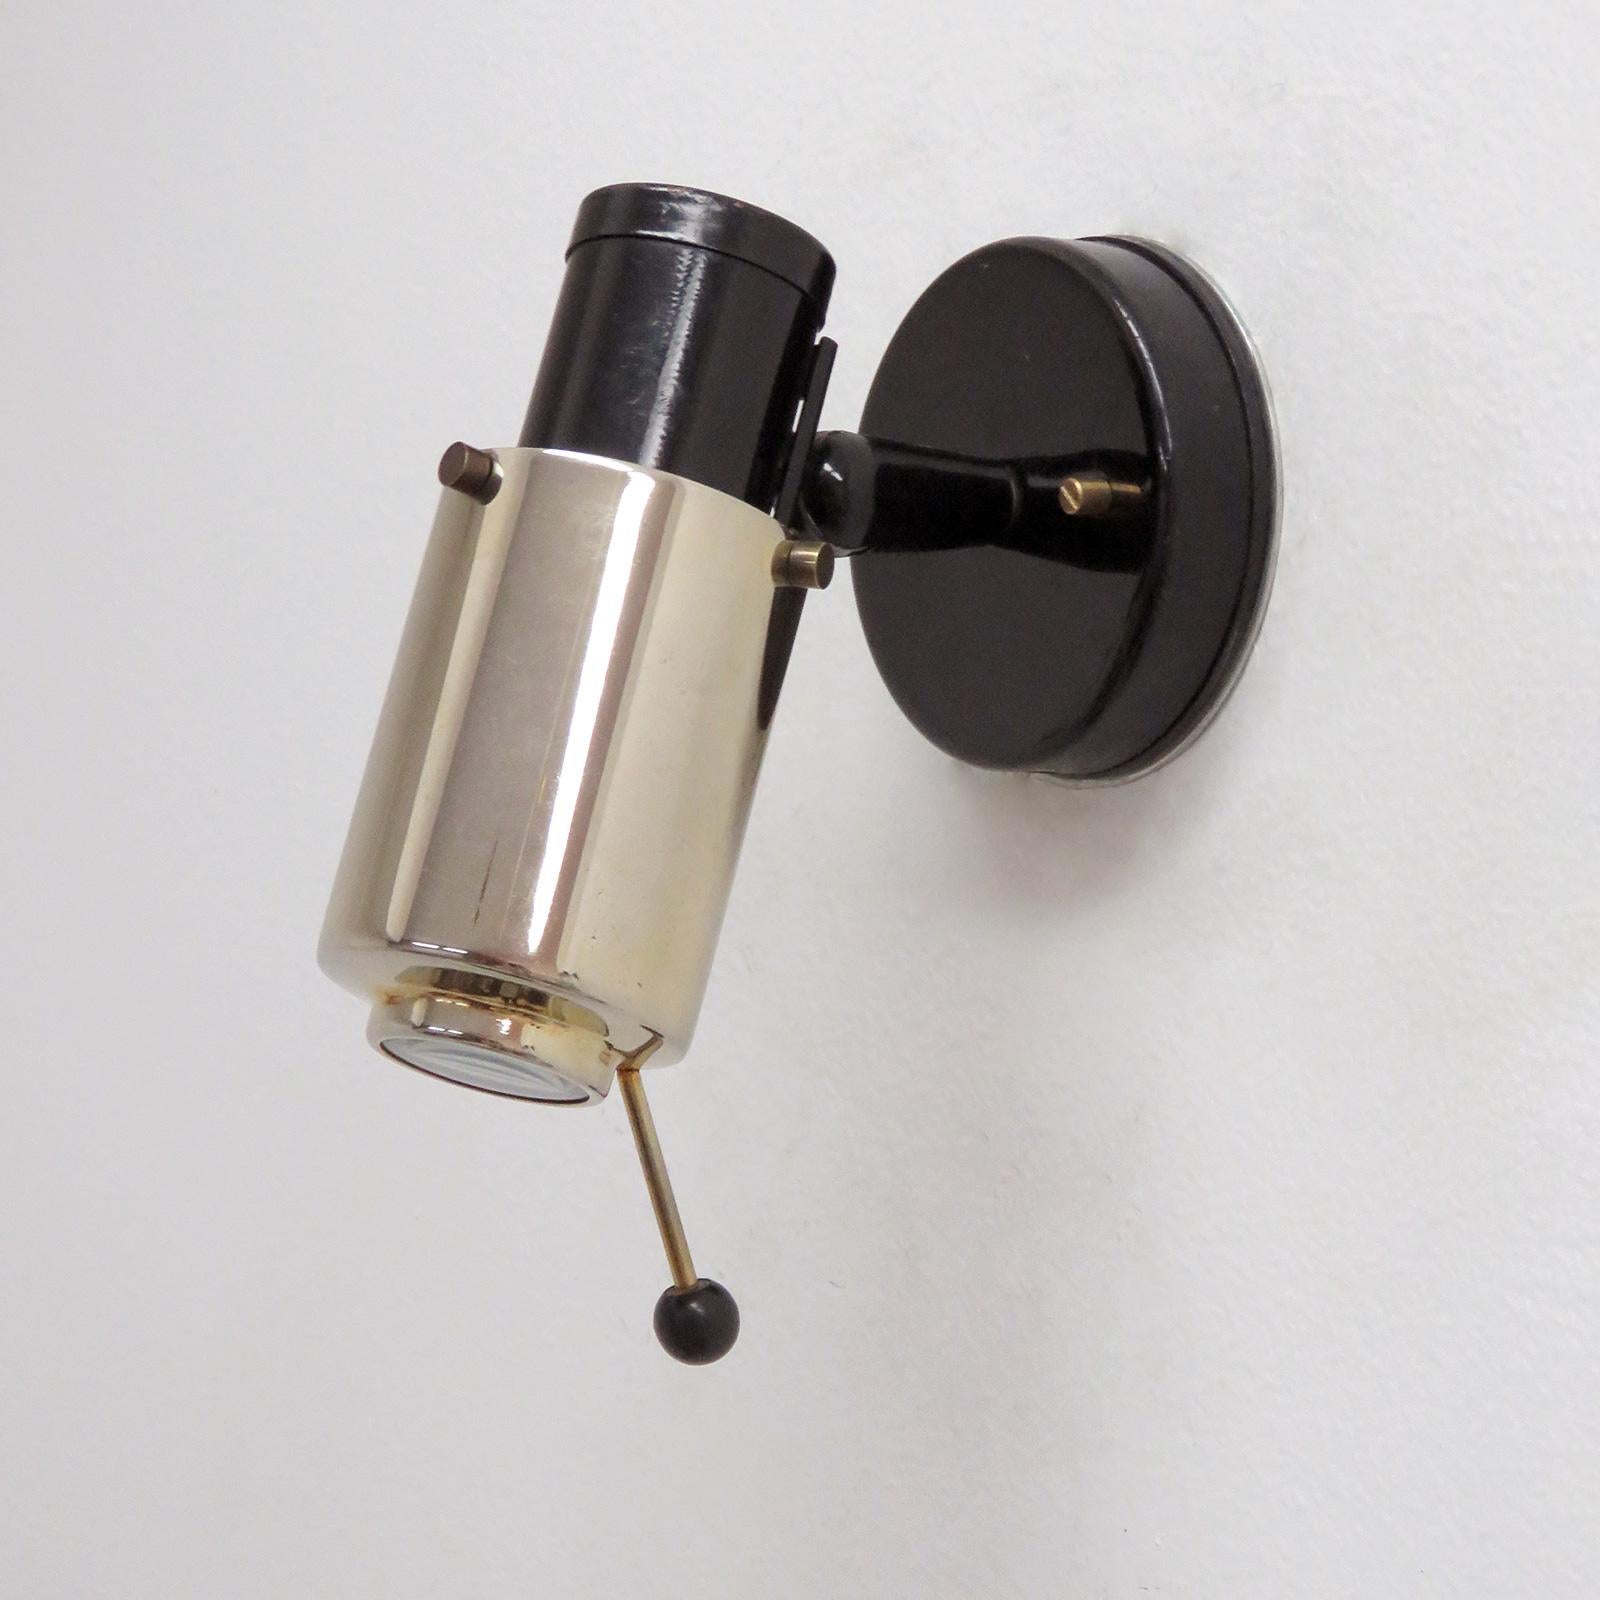 wonderful brass and black enameled wall lights by Jacques Biny for Lita with magnifying lens, handle to adjust angle and direction, provision for on/off pull switch, marked, wired for US standards, one E12 socket, max. wattage 40w, bulbs provided as